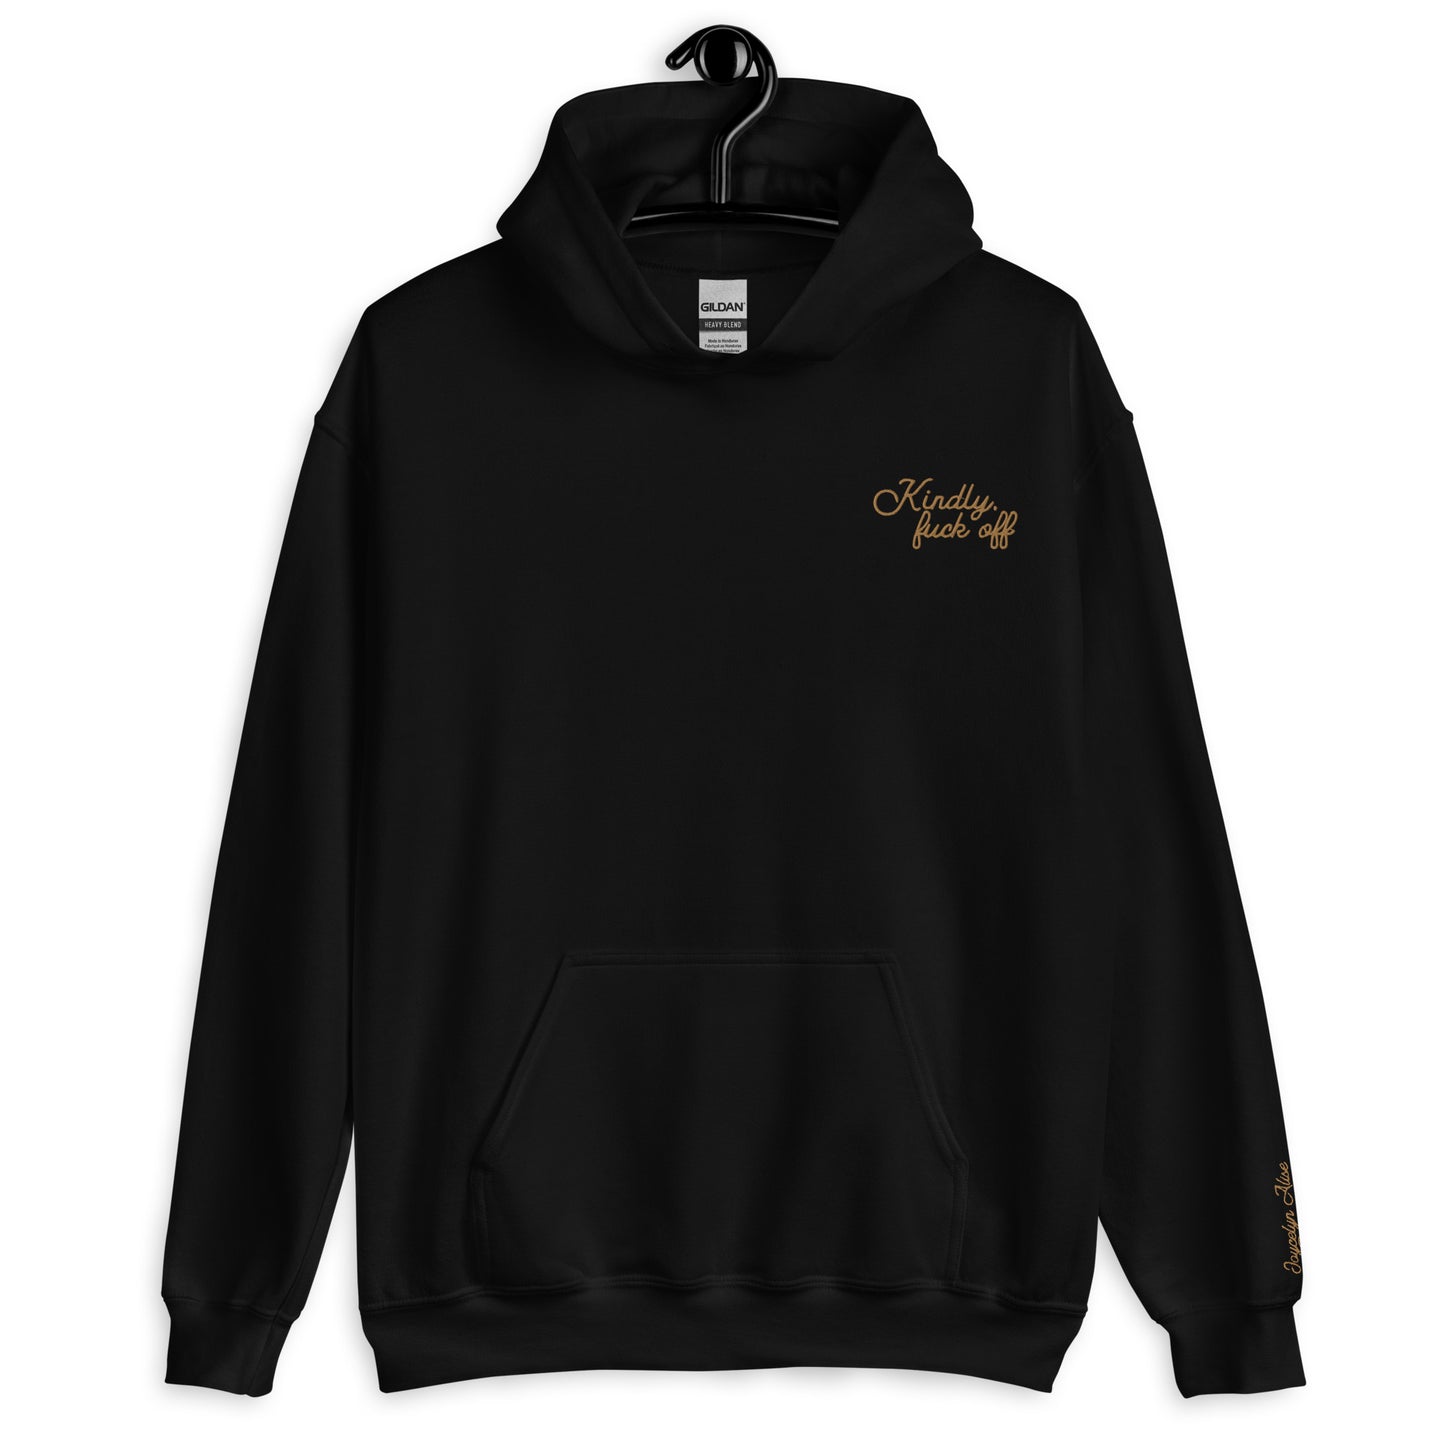 The kindly hoodie✨gold edition✨